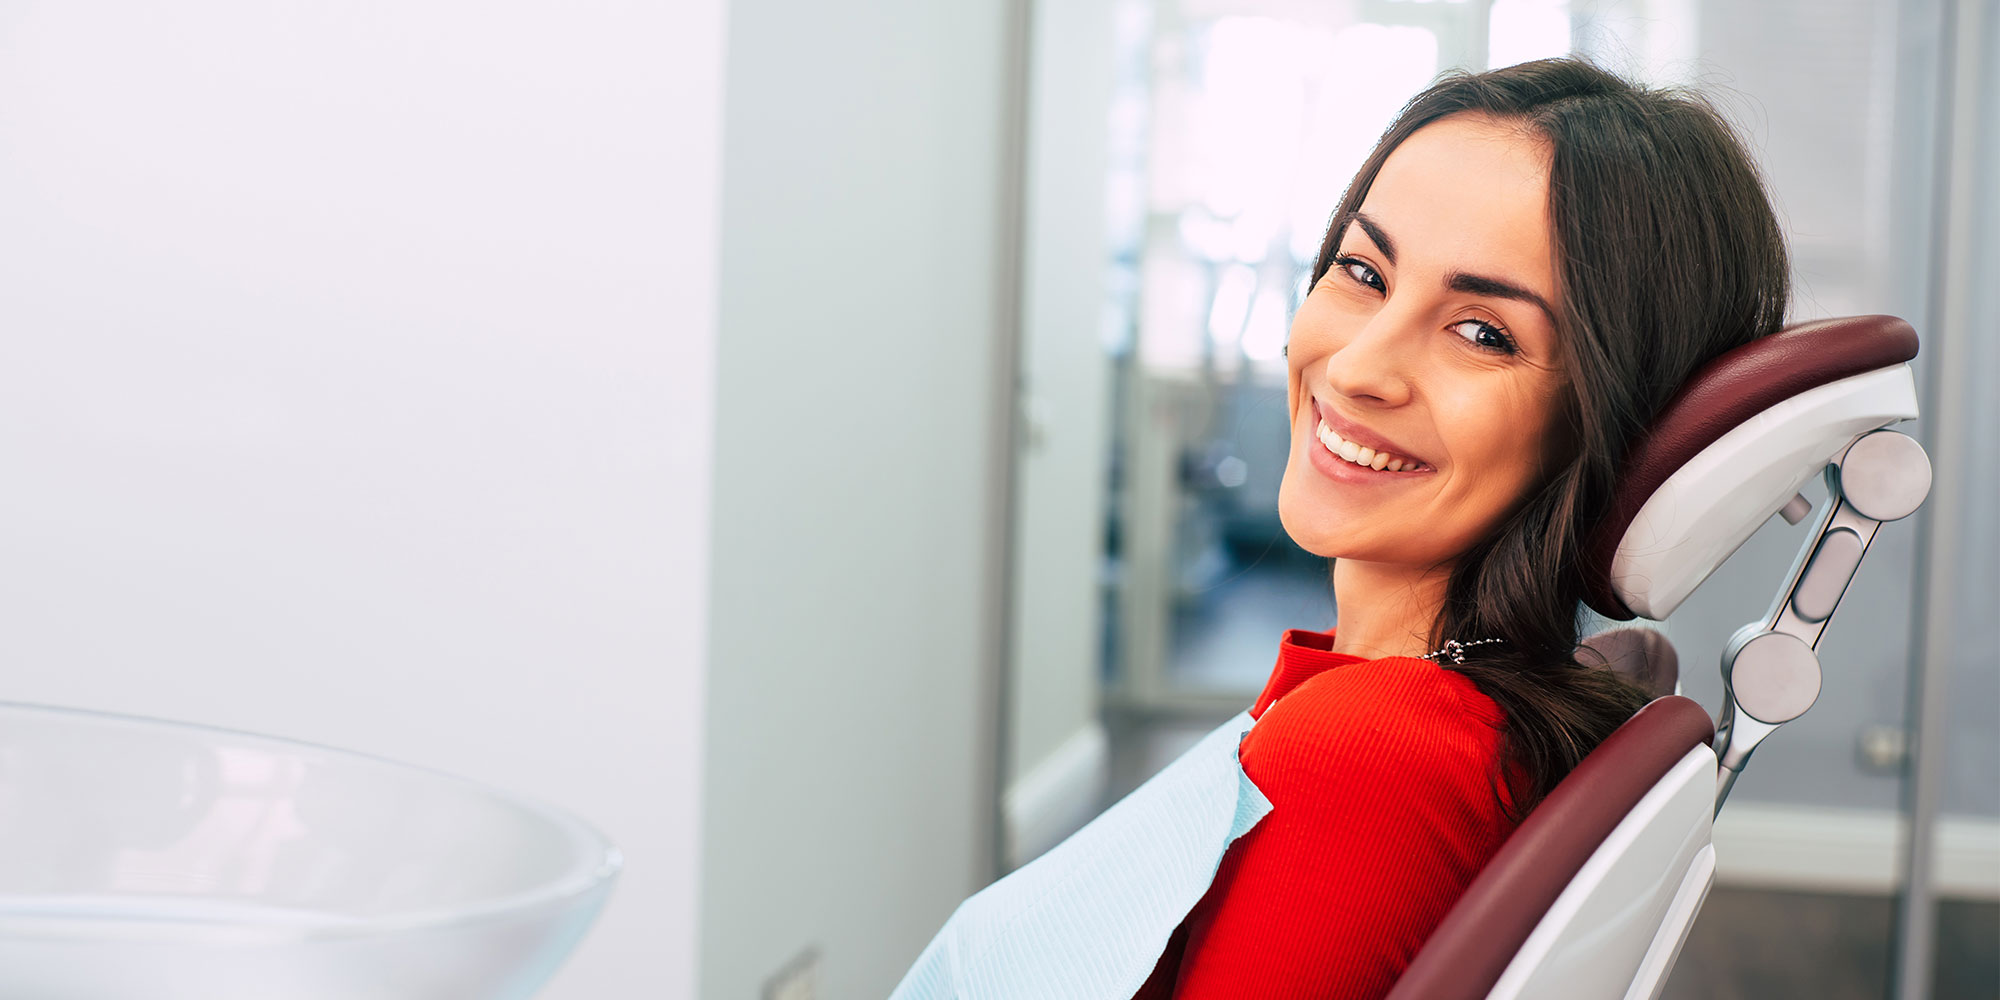 Restoring Smiles with Precision and Care - News - Spaulding Dental